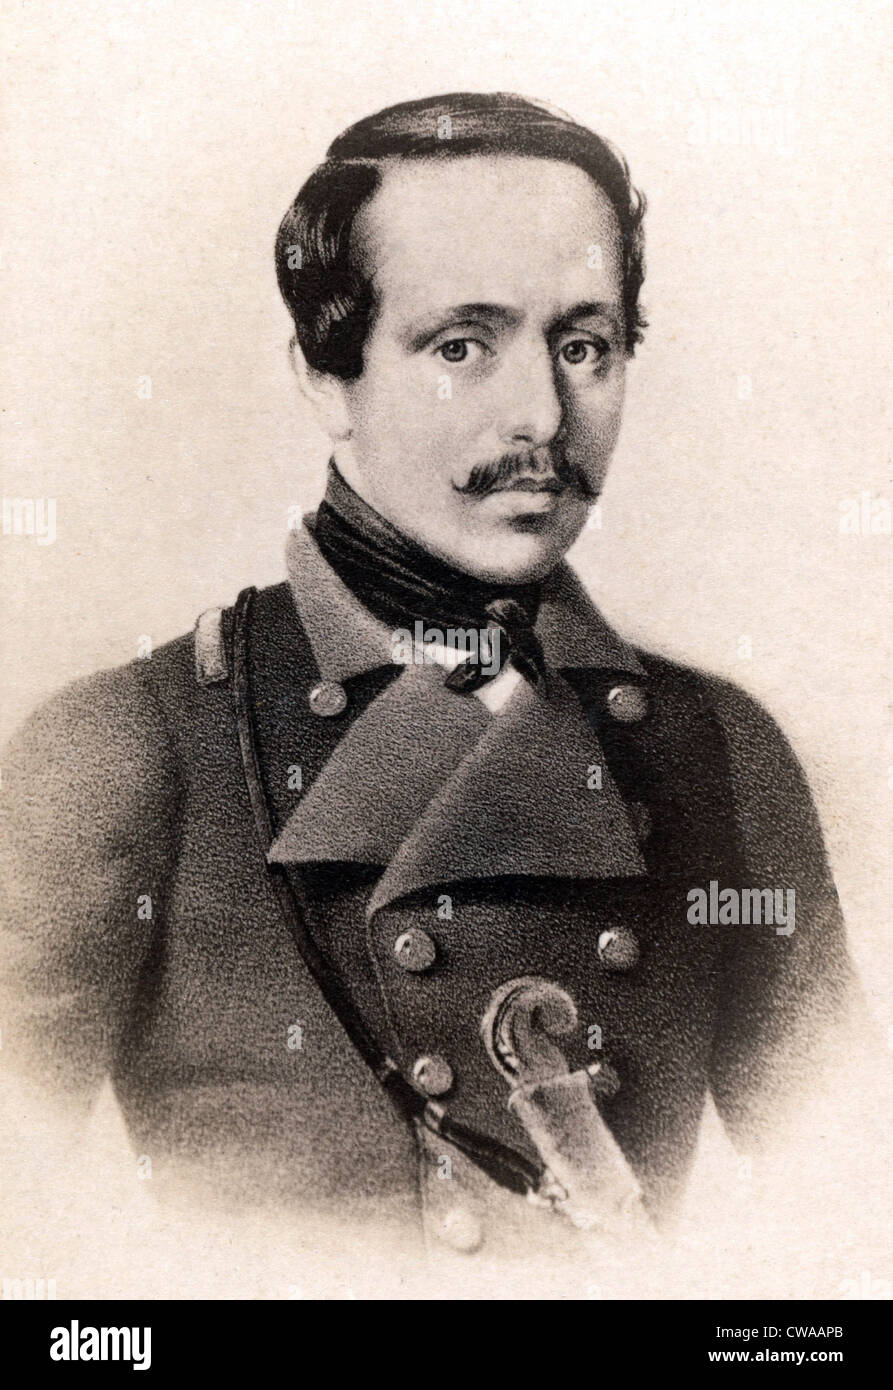 Mikhail Lermontov (1814-1841) Russian poet and novelist wrote the influential 'A Hero of Our Time', 1840. Stock Photo